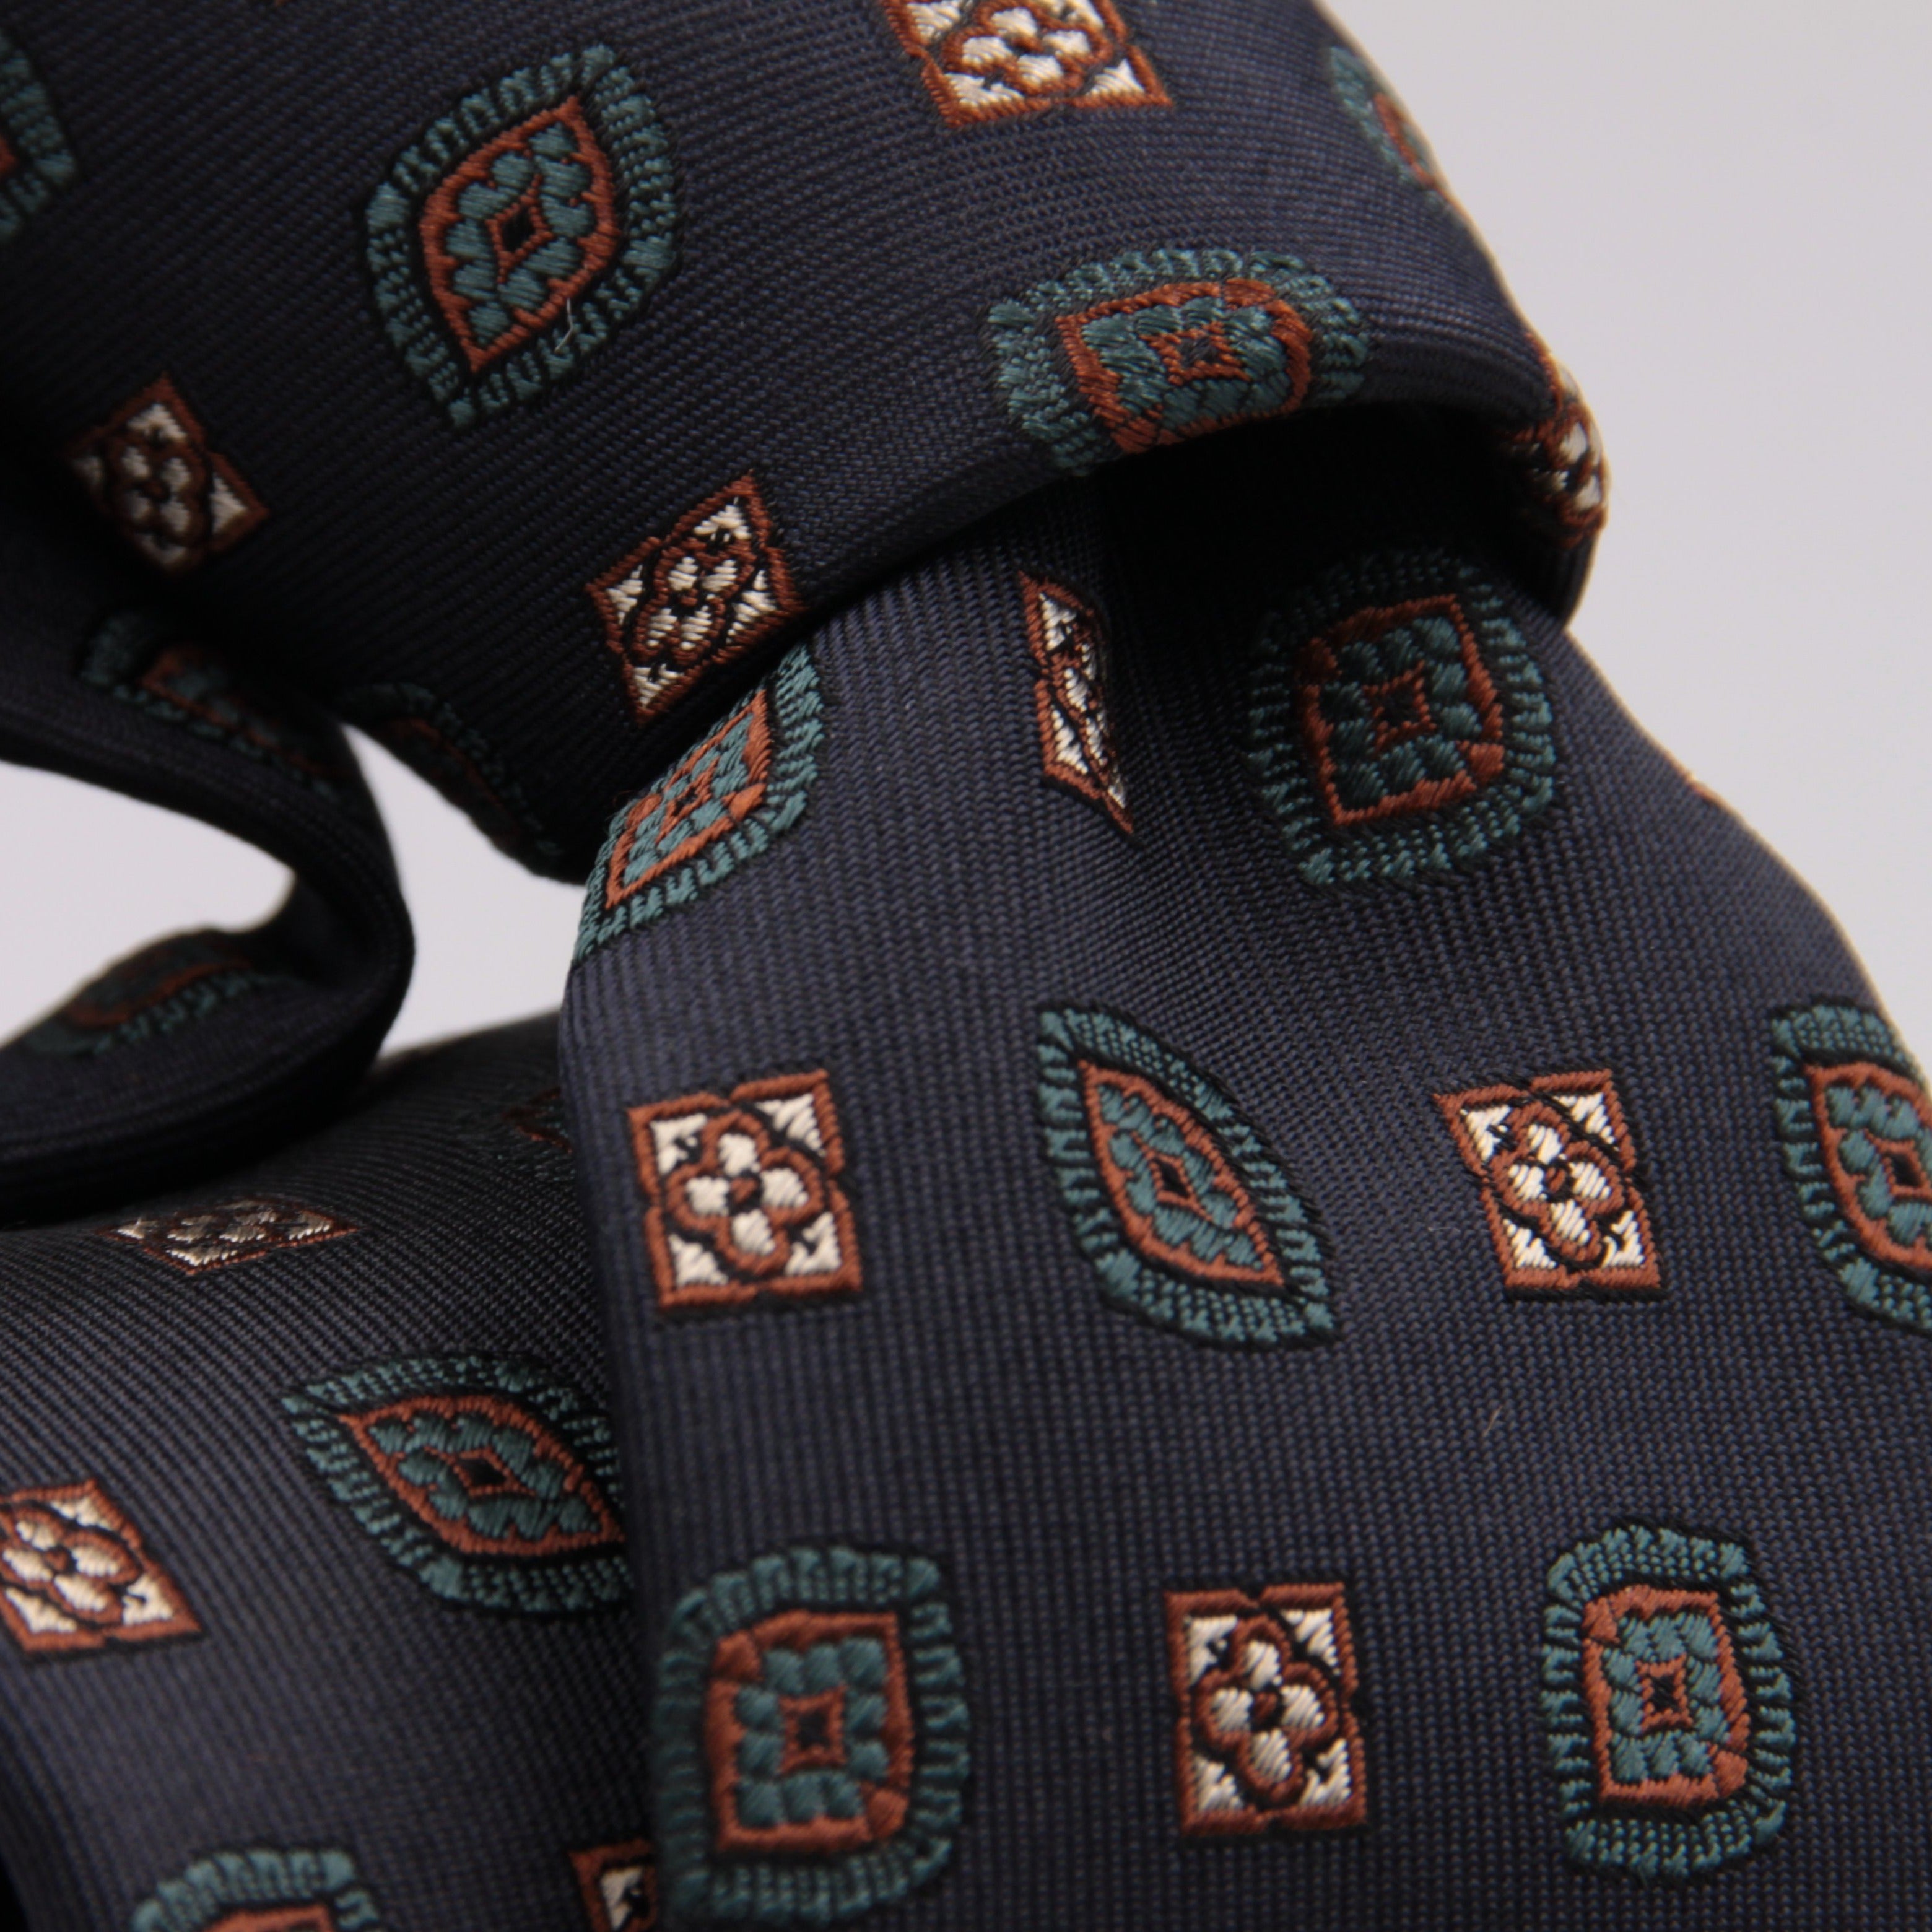 Drake's for Cruciani e Bella 100%  Woven Silk Tipped Blue, Green, Rust and Light Yellow Motif tie Handmade in London, England 8 cm x 150 cm #5190